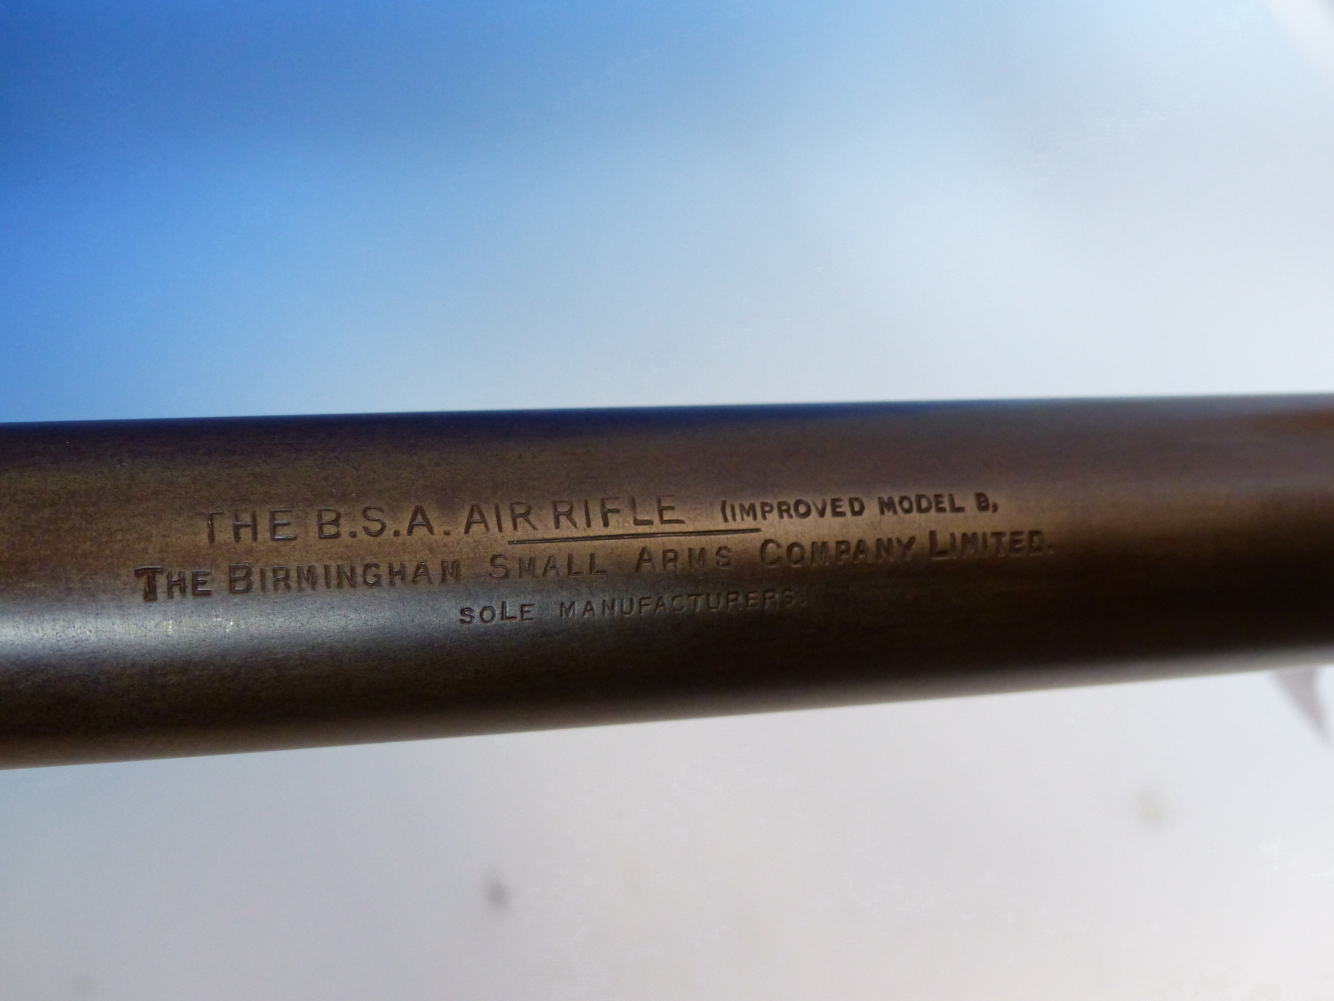 BSA MODEL B AIR RIFLE 0.177 SERIAL No.16662 WITH SLIP. - Image 7 of 7